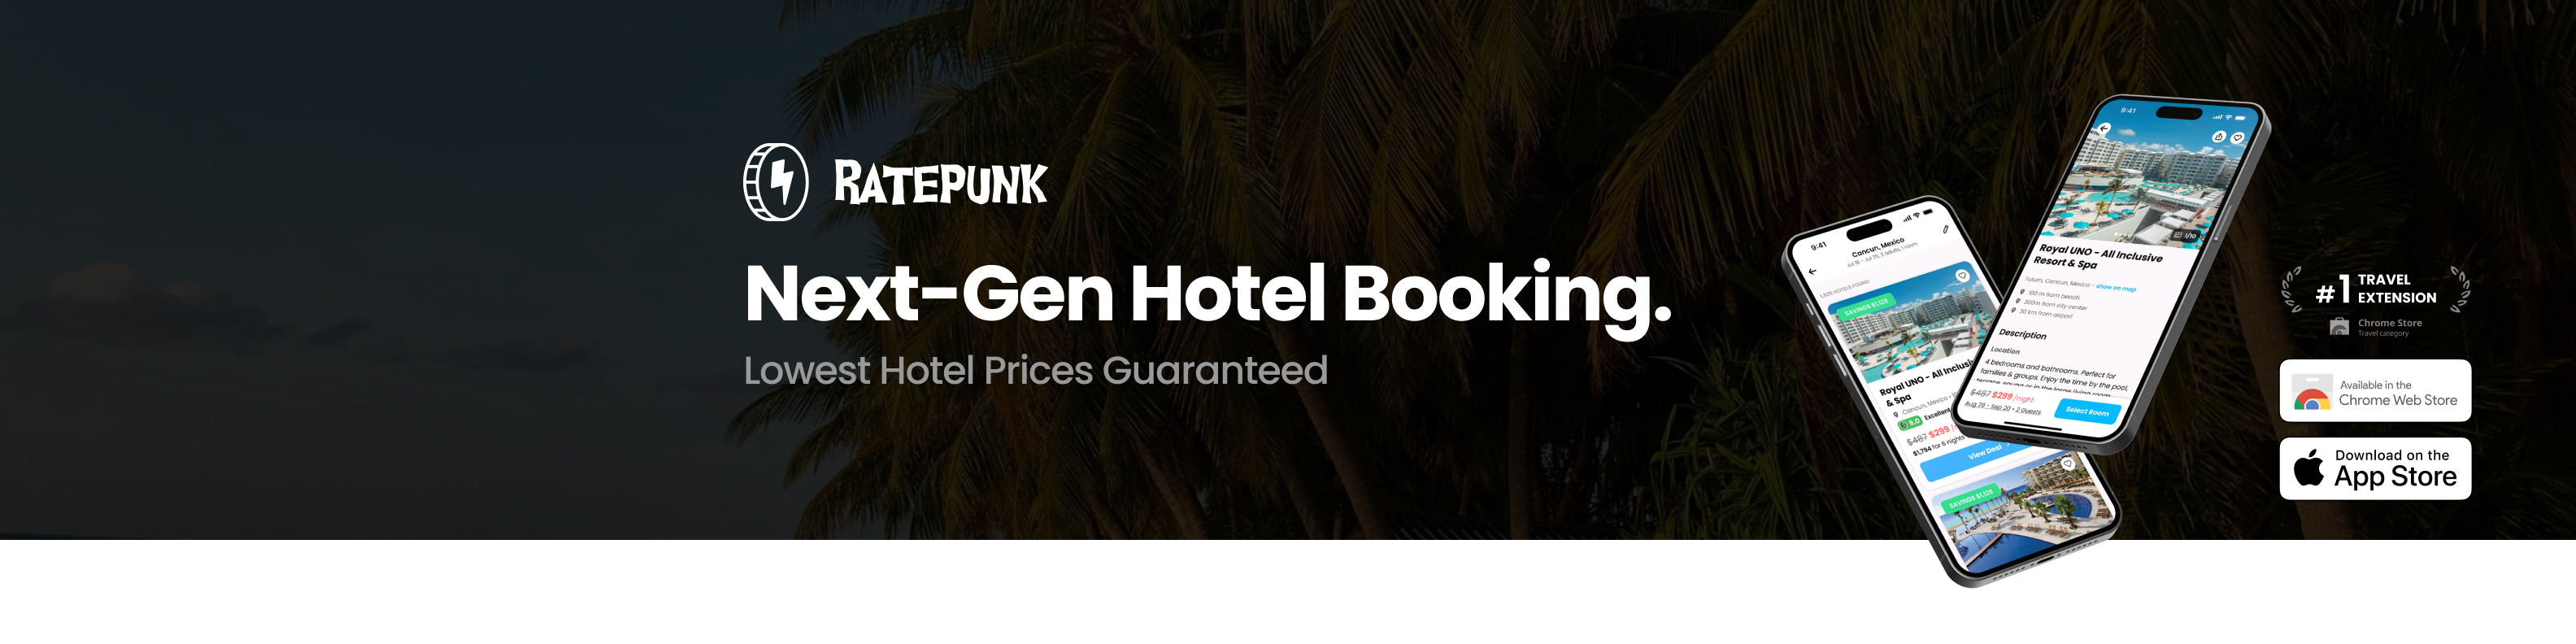 RatePunk - next gem hotel booking, lowest hotel prices guaranteed